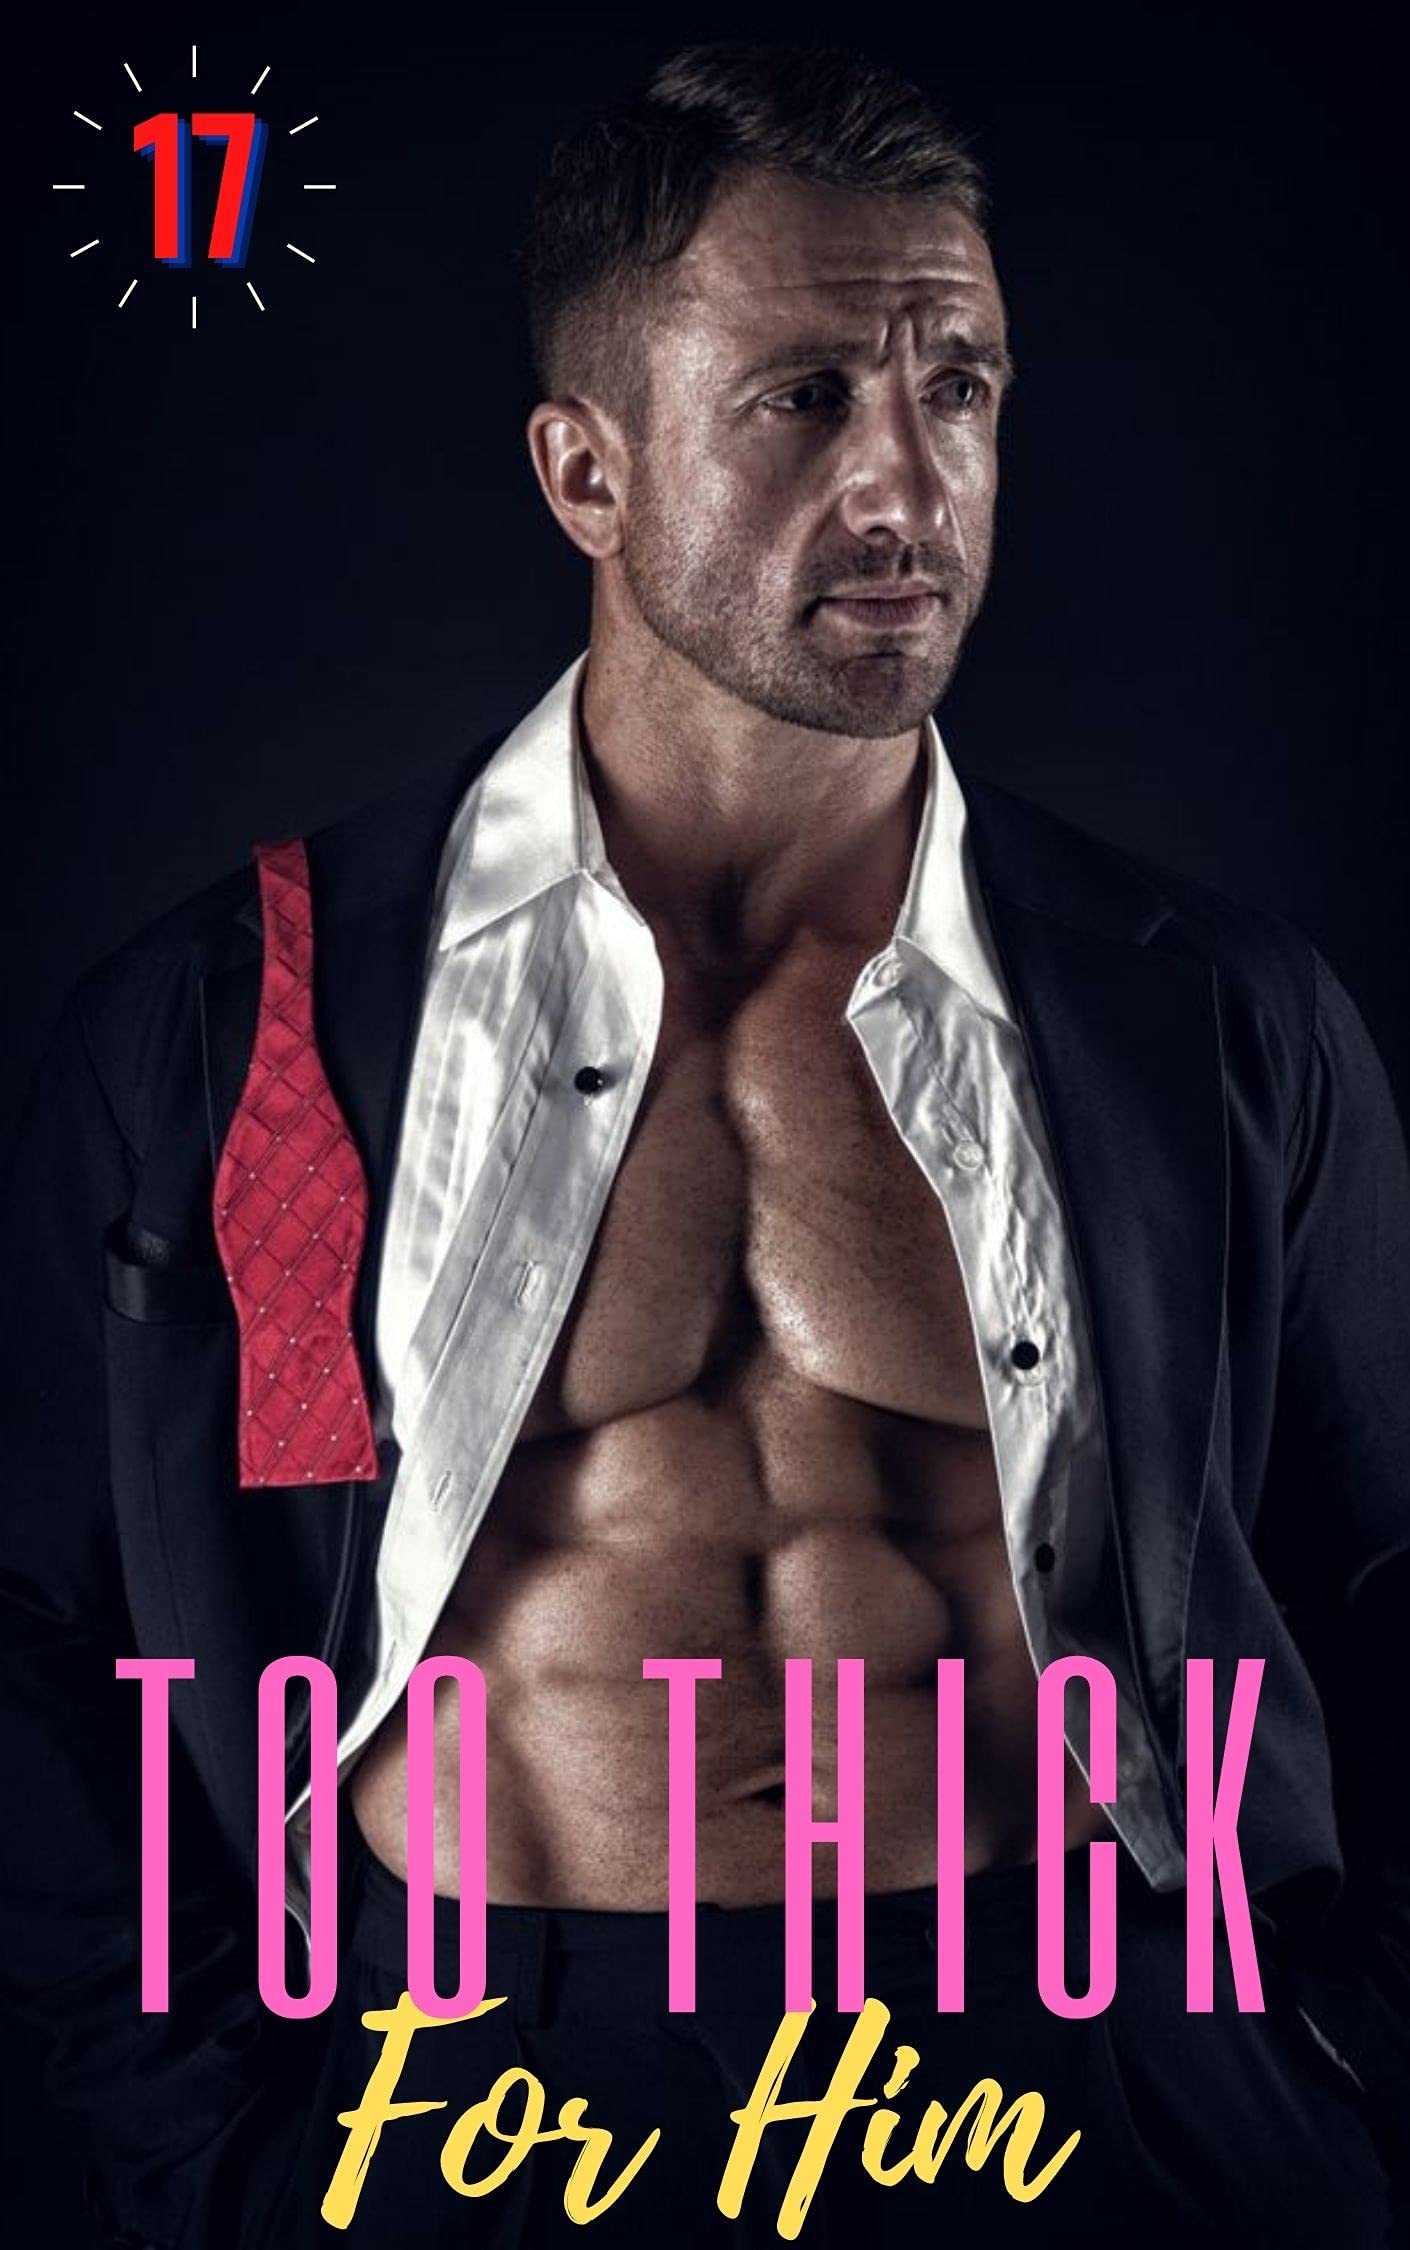 adriana arguello recommends Twinks With Older